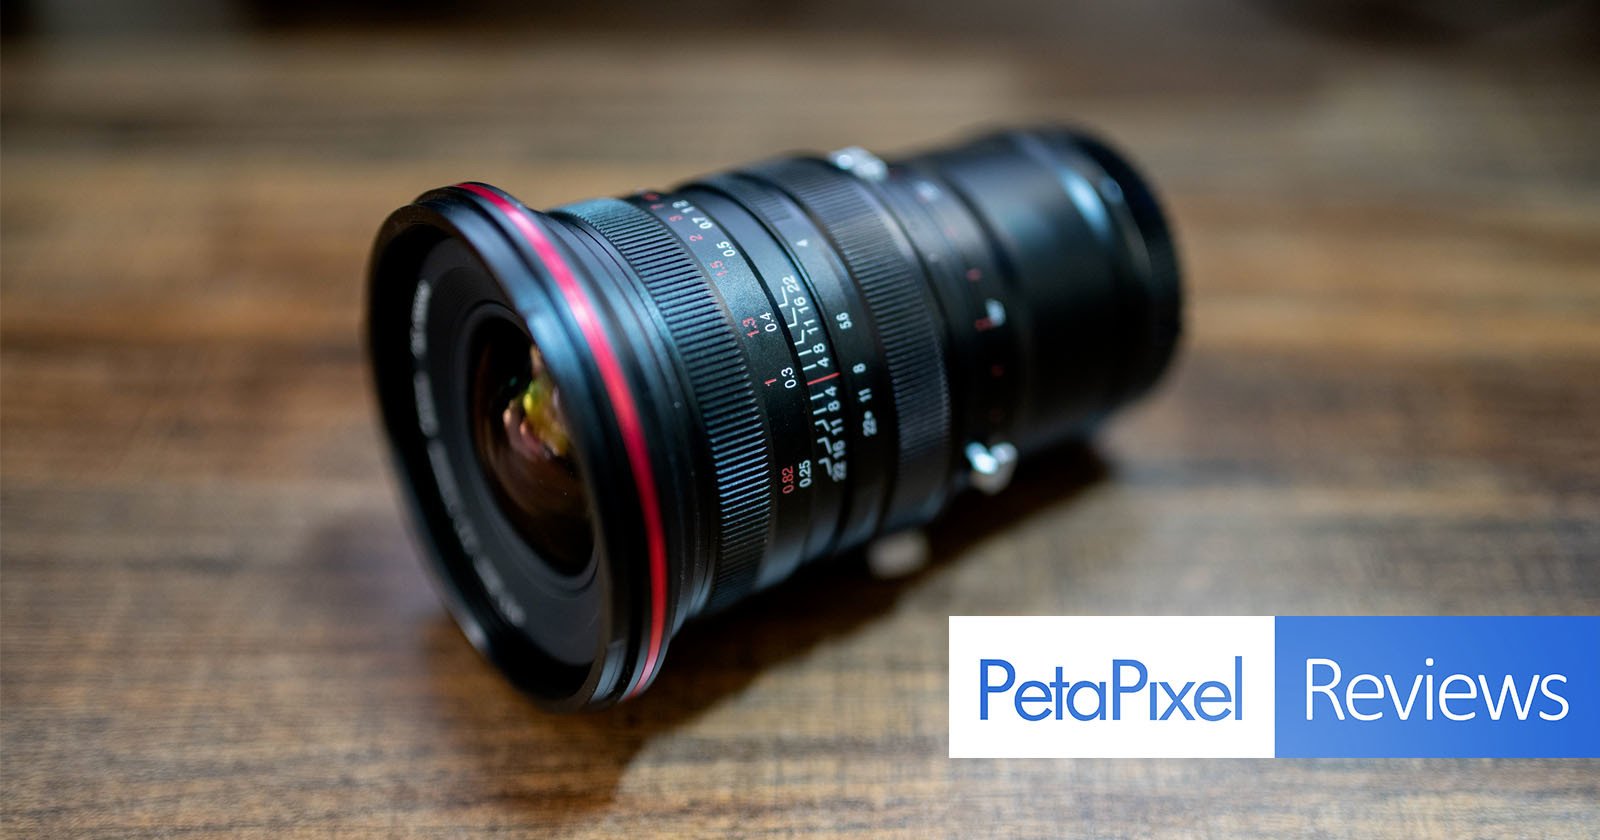 Laowa 20mm f/4 Shift Lens Review: An Affordable Architecture Optic